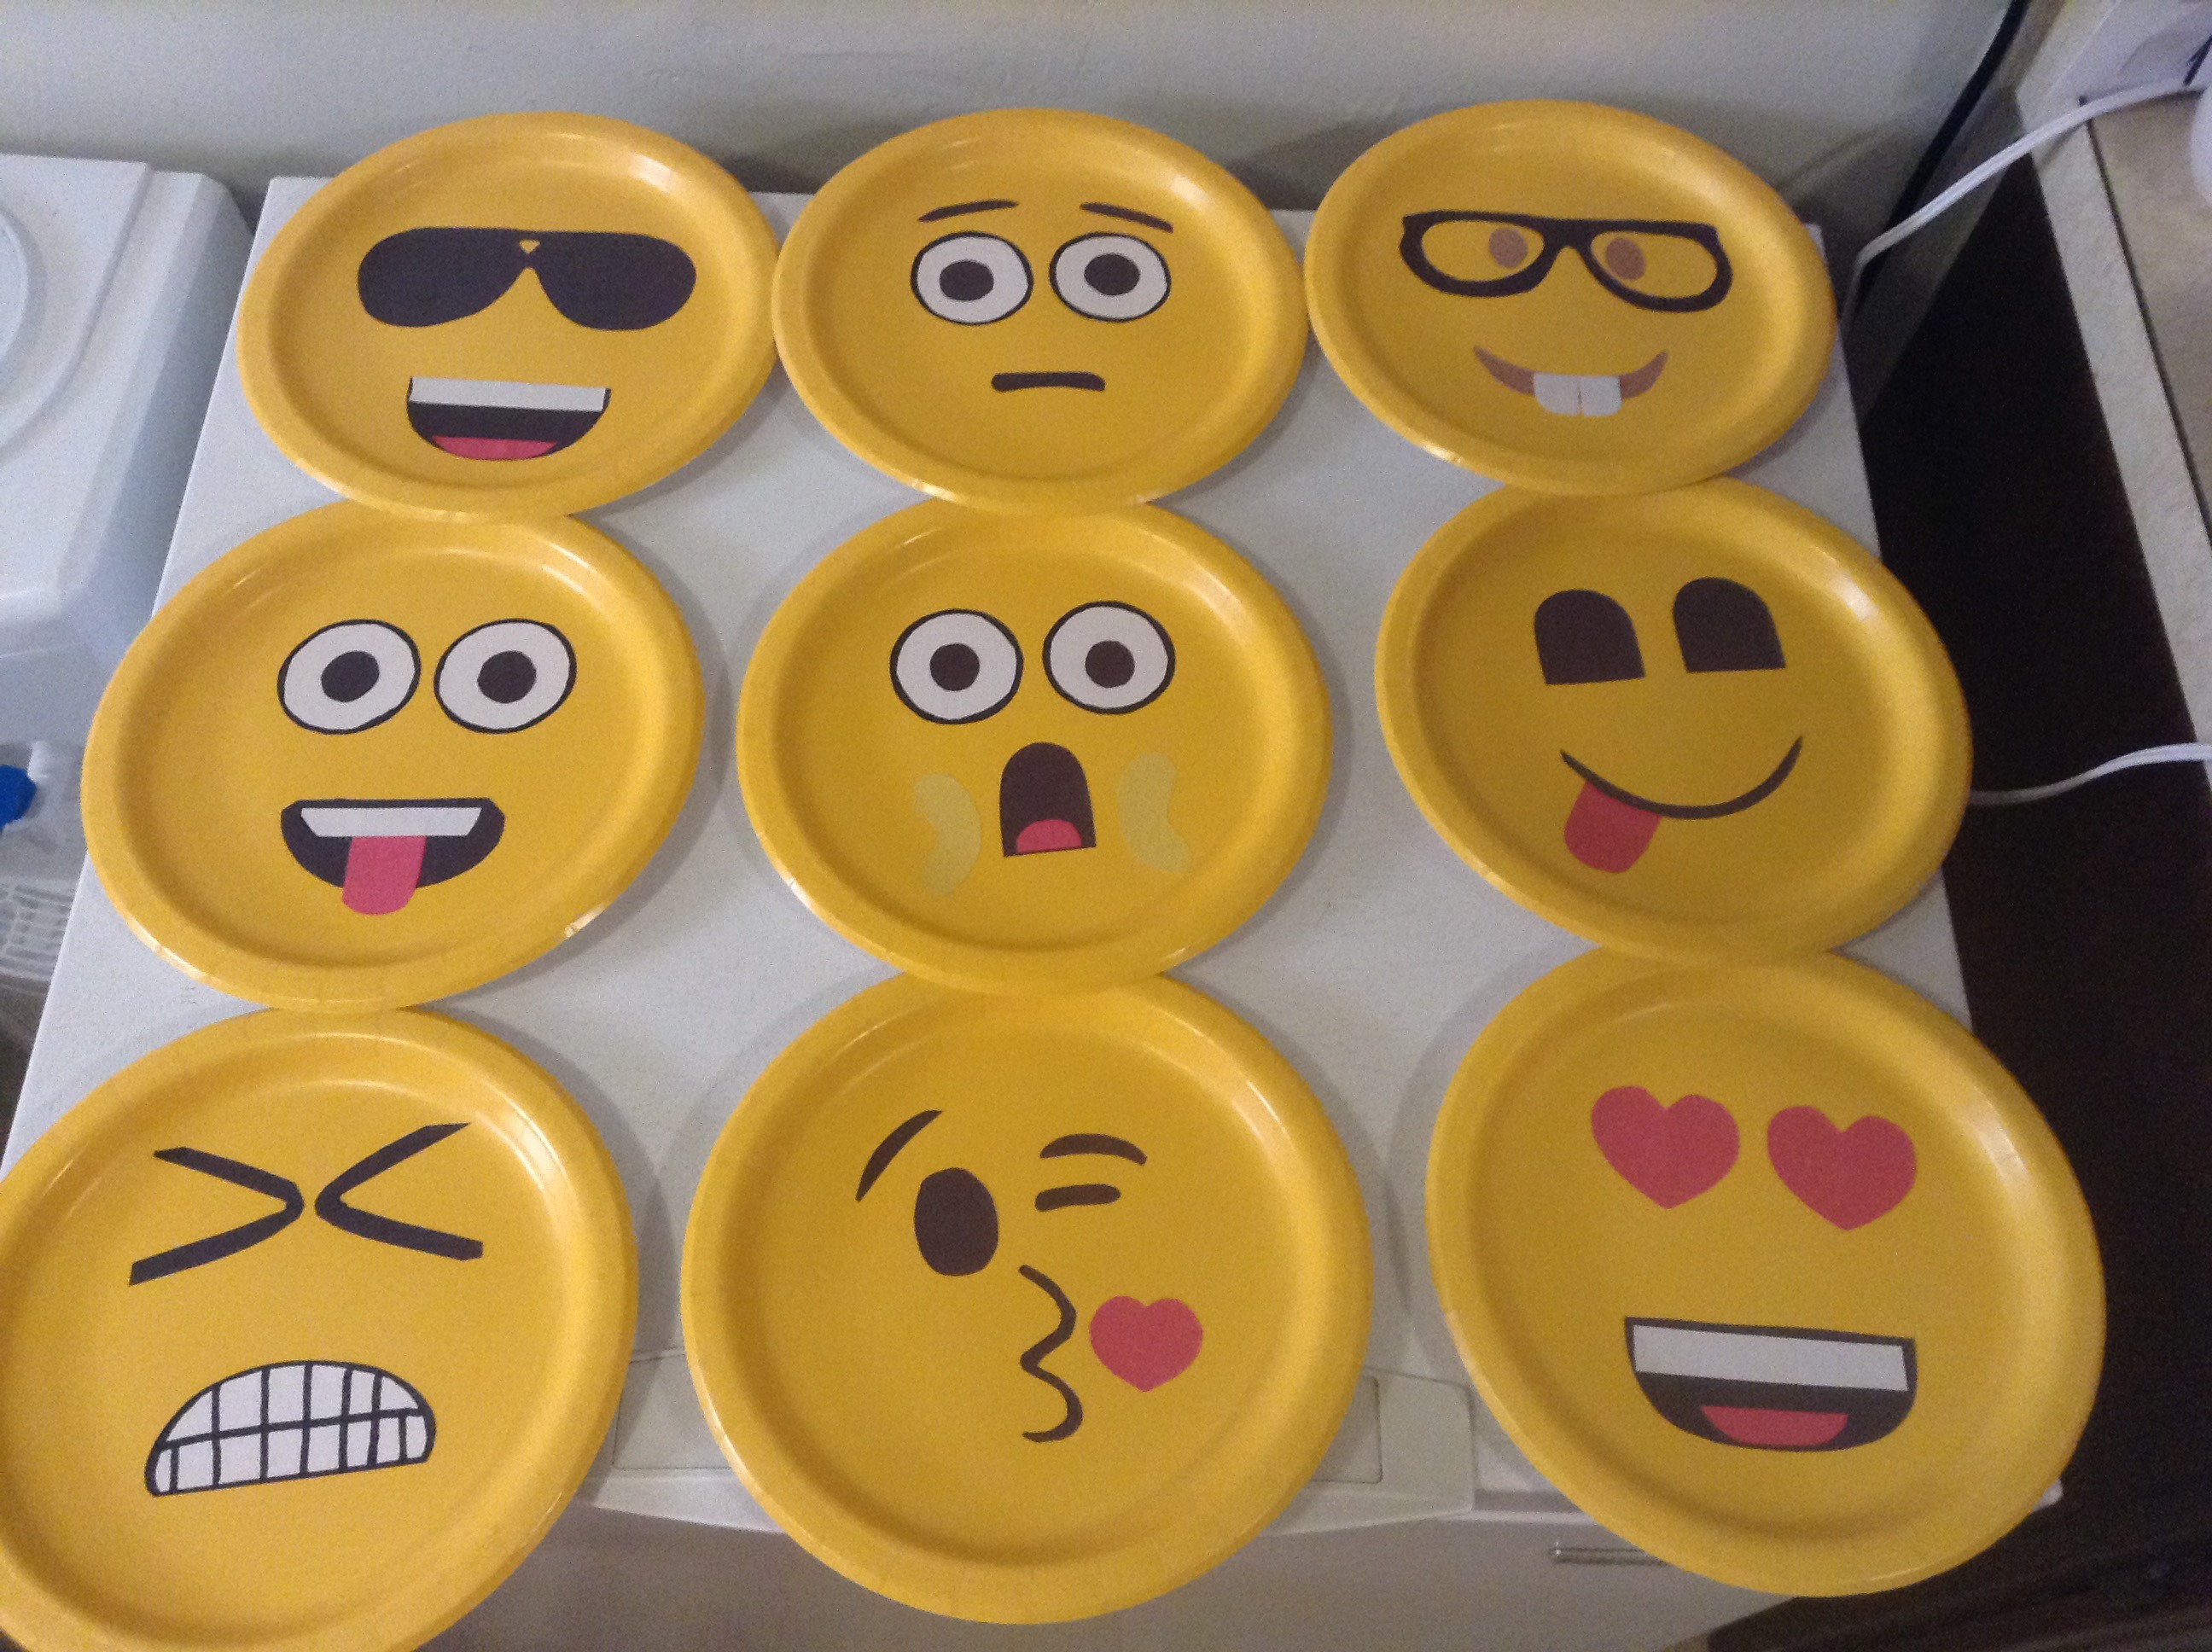 2592x1936 Emoji faces made on paper plate